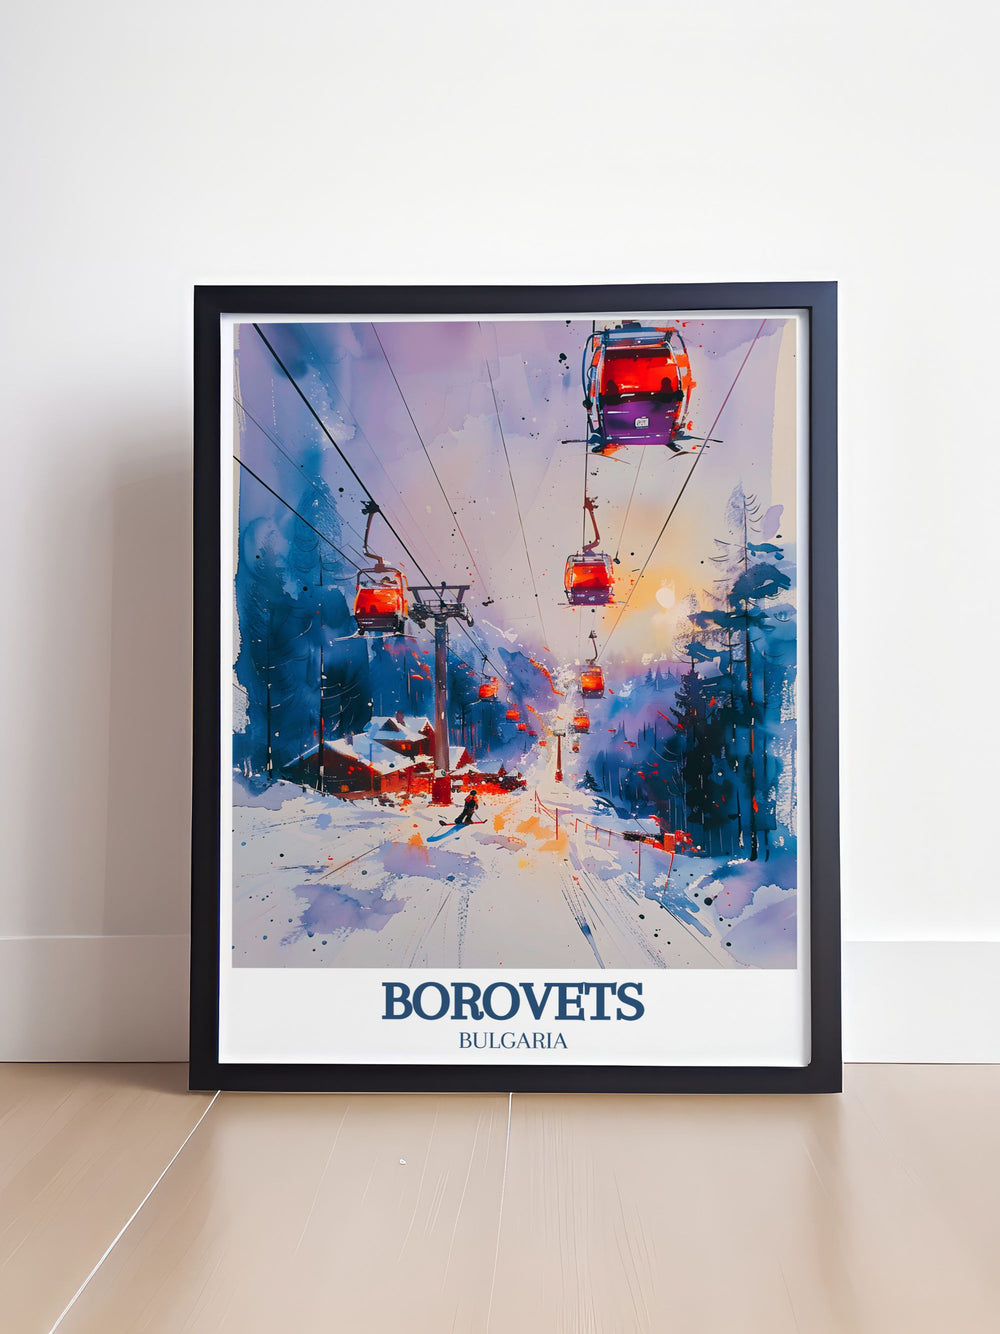 Stunning Borovets ski resort art print highlighting the vibrant slopes and the exciting Yastrebets Express, ideal for skiing enthusiasts and nature lovers.